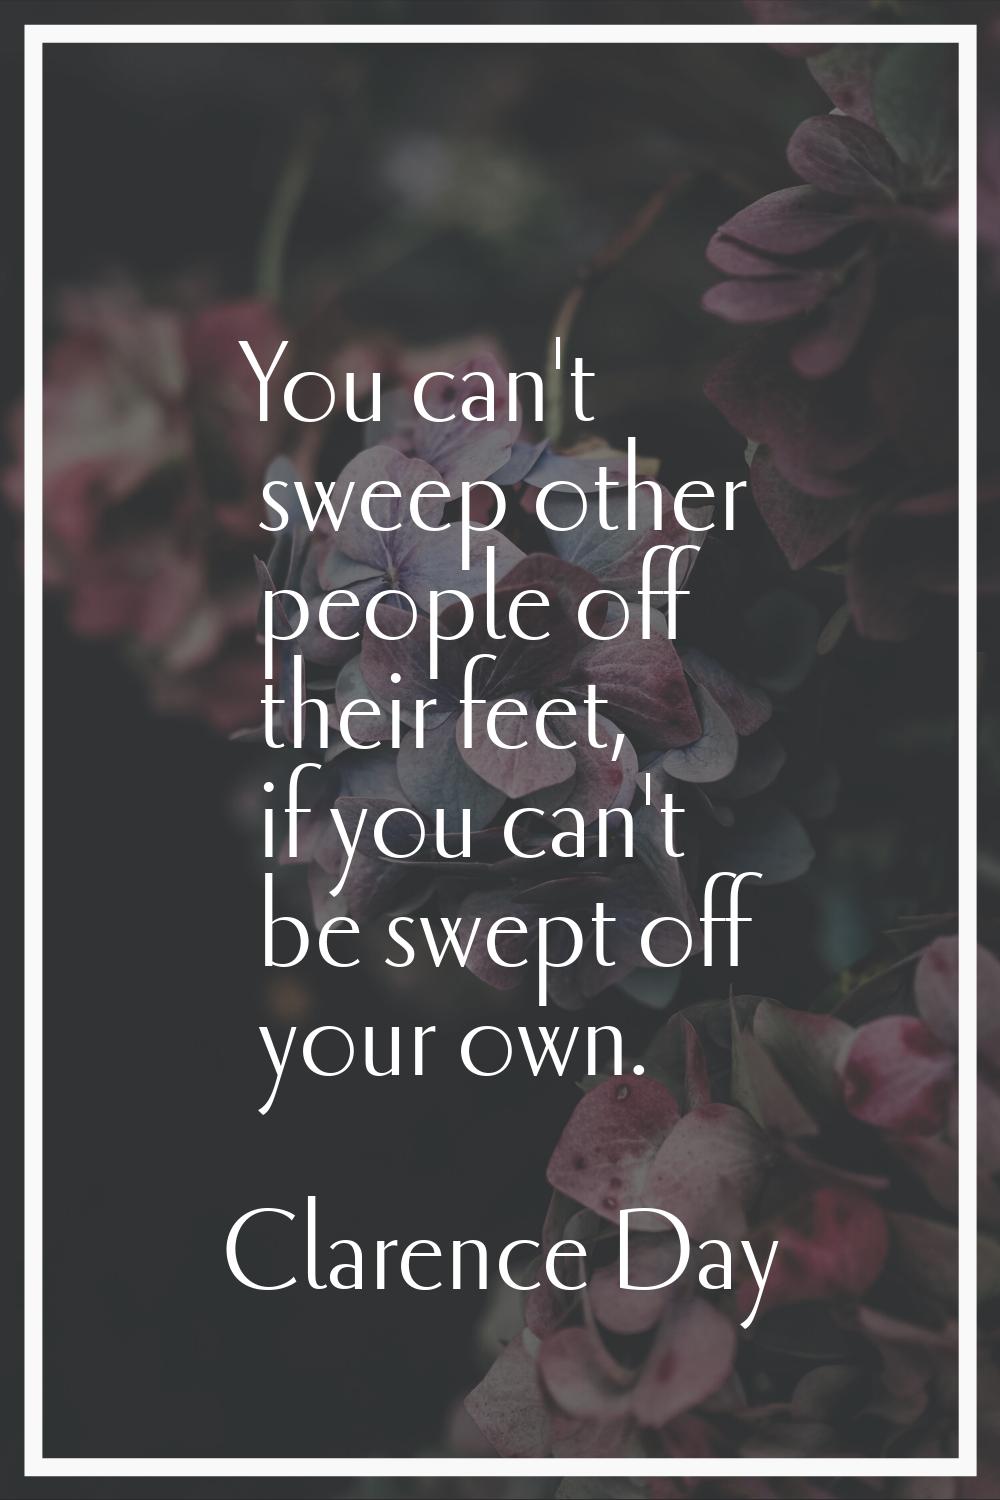 You can't sweep other people off their feet, if you can't be swept off your own.